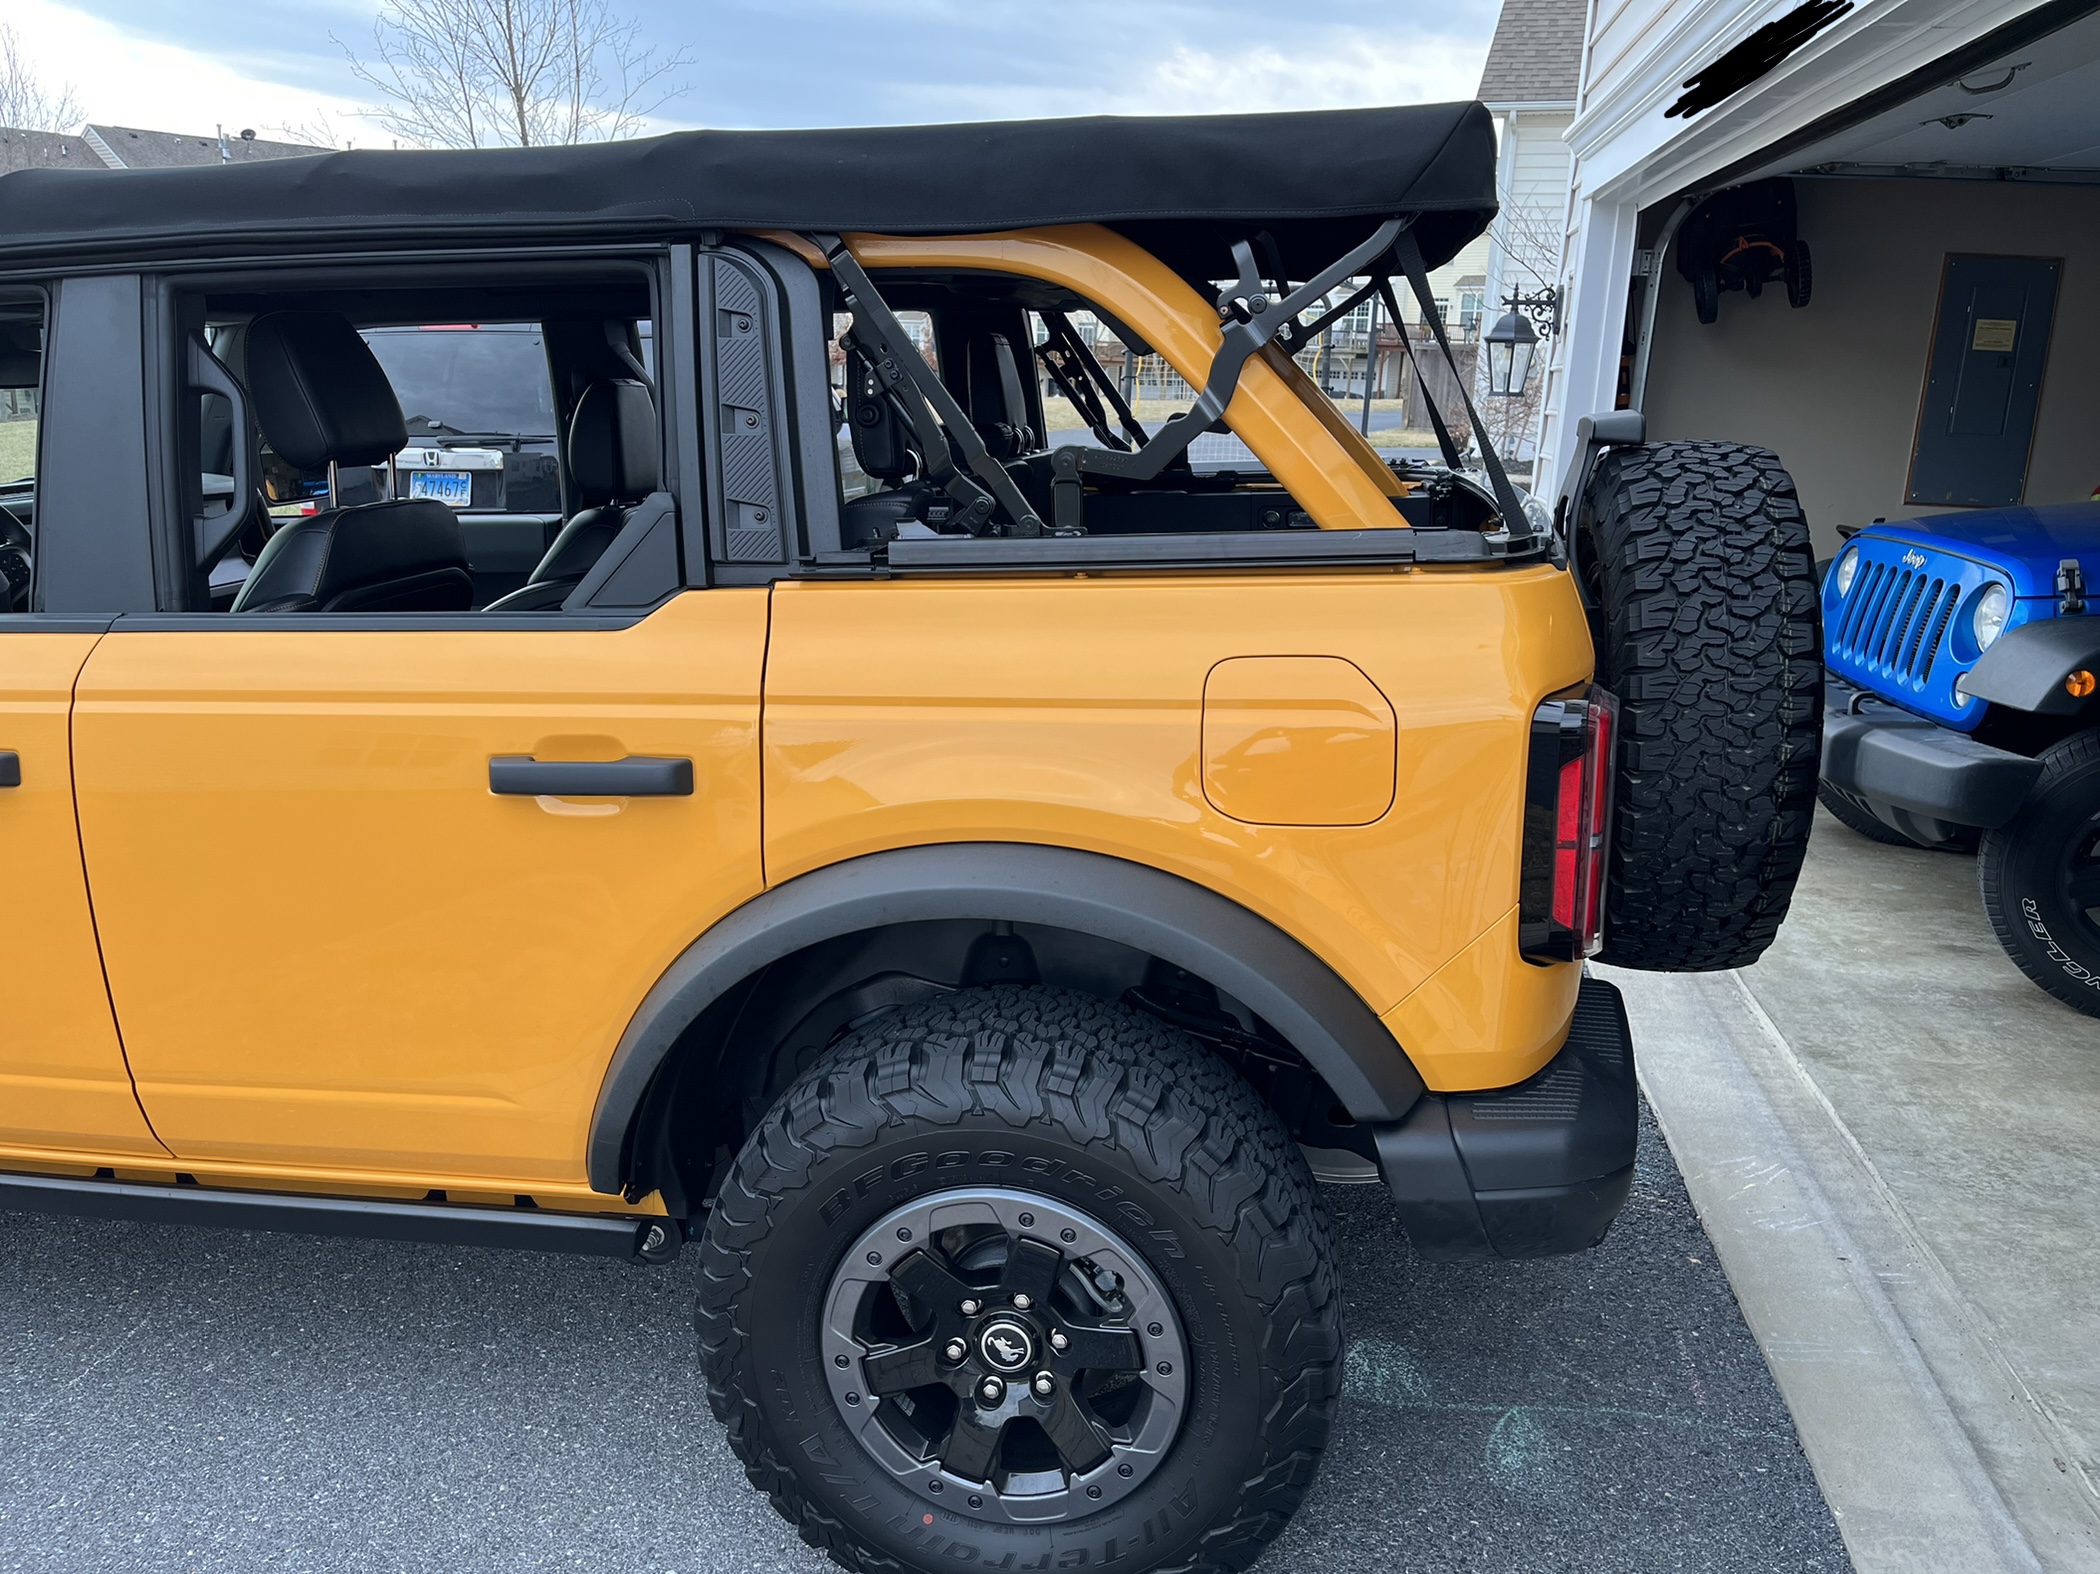 Ford Bronco Loving the Look of the Soft Top Without the Windows E7637360-1290-4309-8C6B-F55EB274B2A1